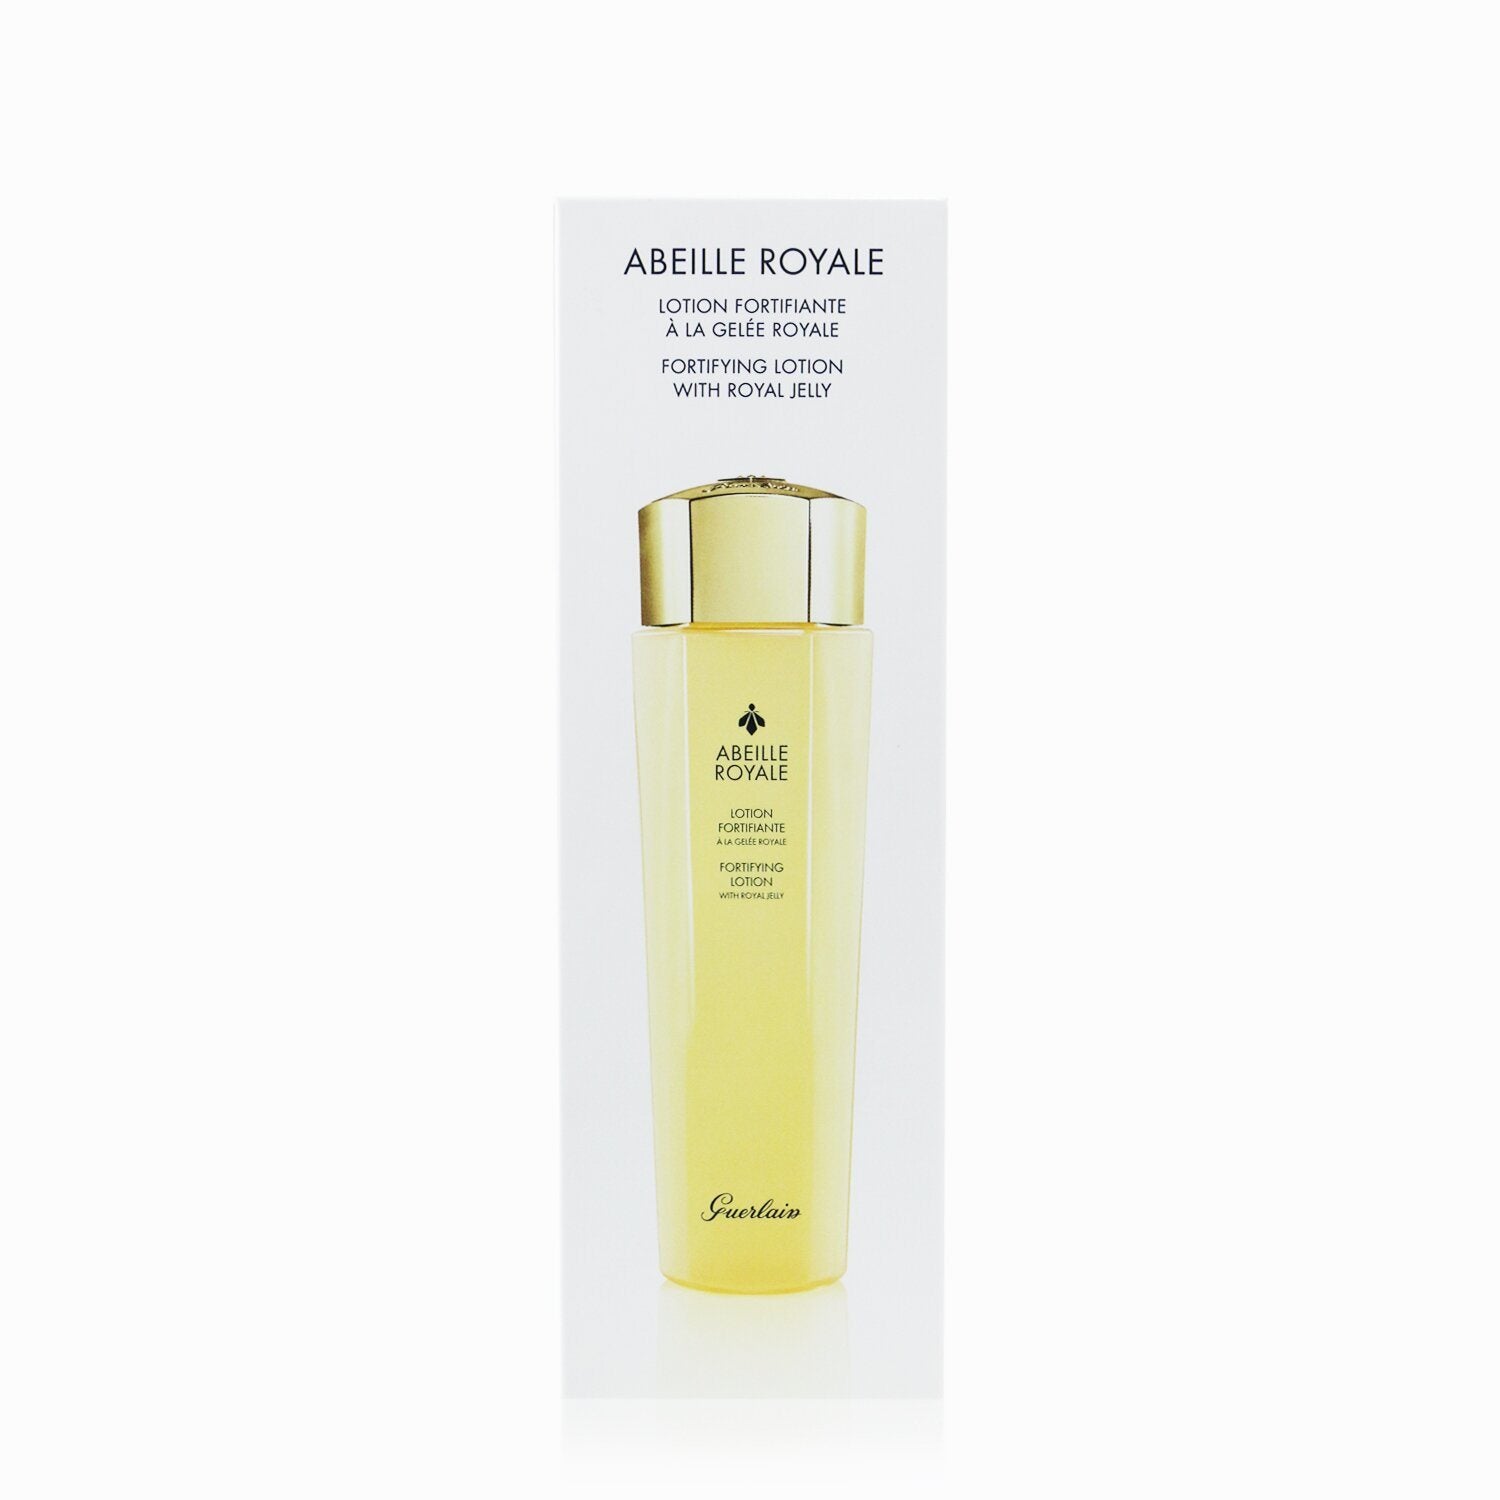 GUERLAIN - Abeille Royale Fortifying Lotion With Royal Jelly 615557 150ml/5oz 3P's Inclusive Beauty